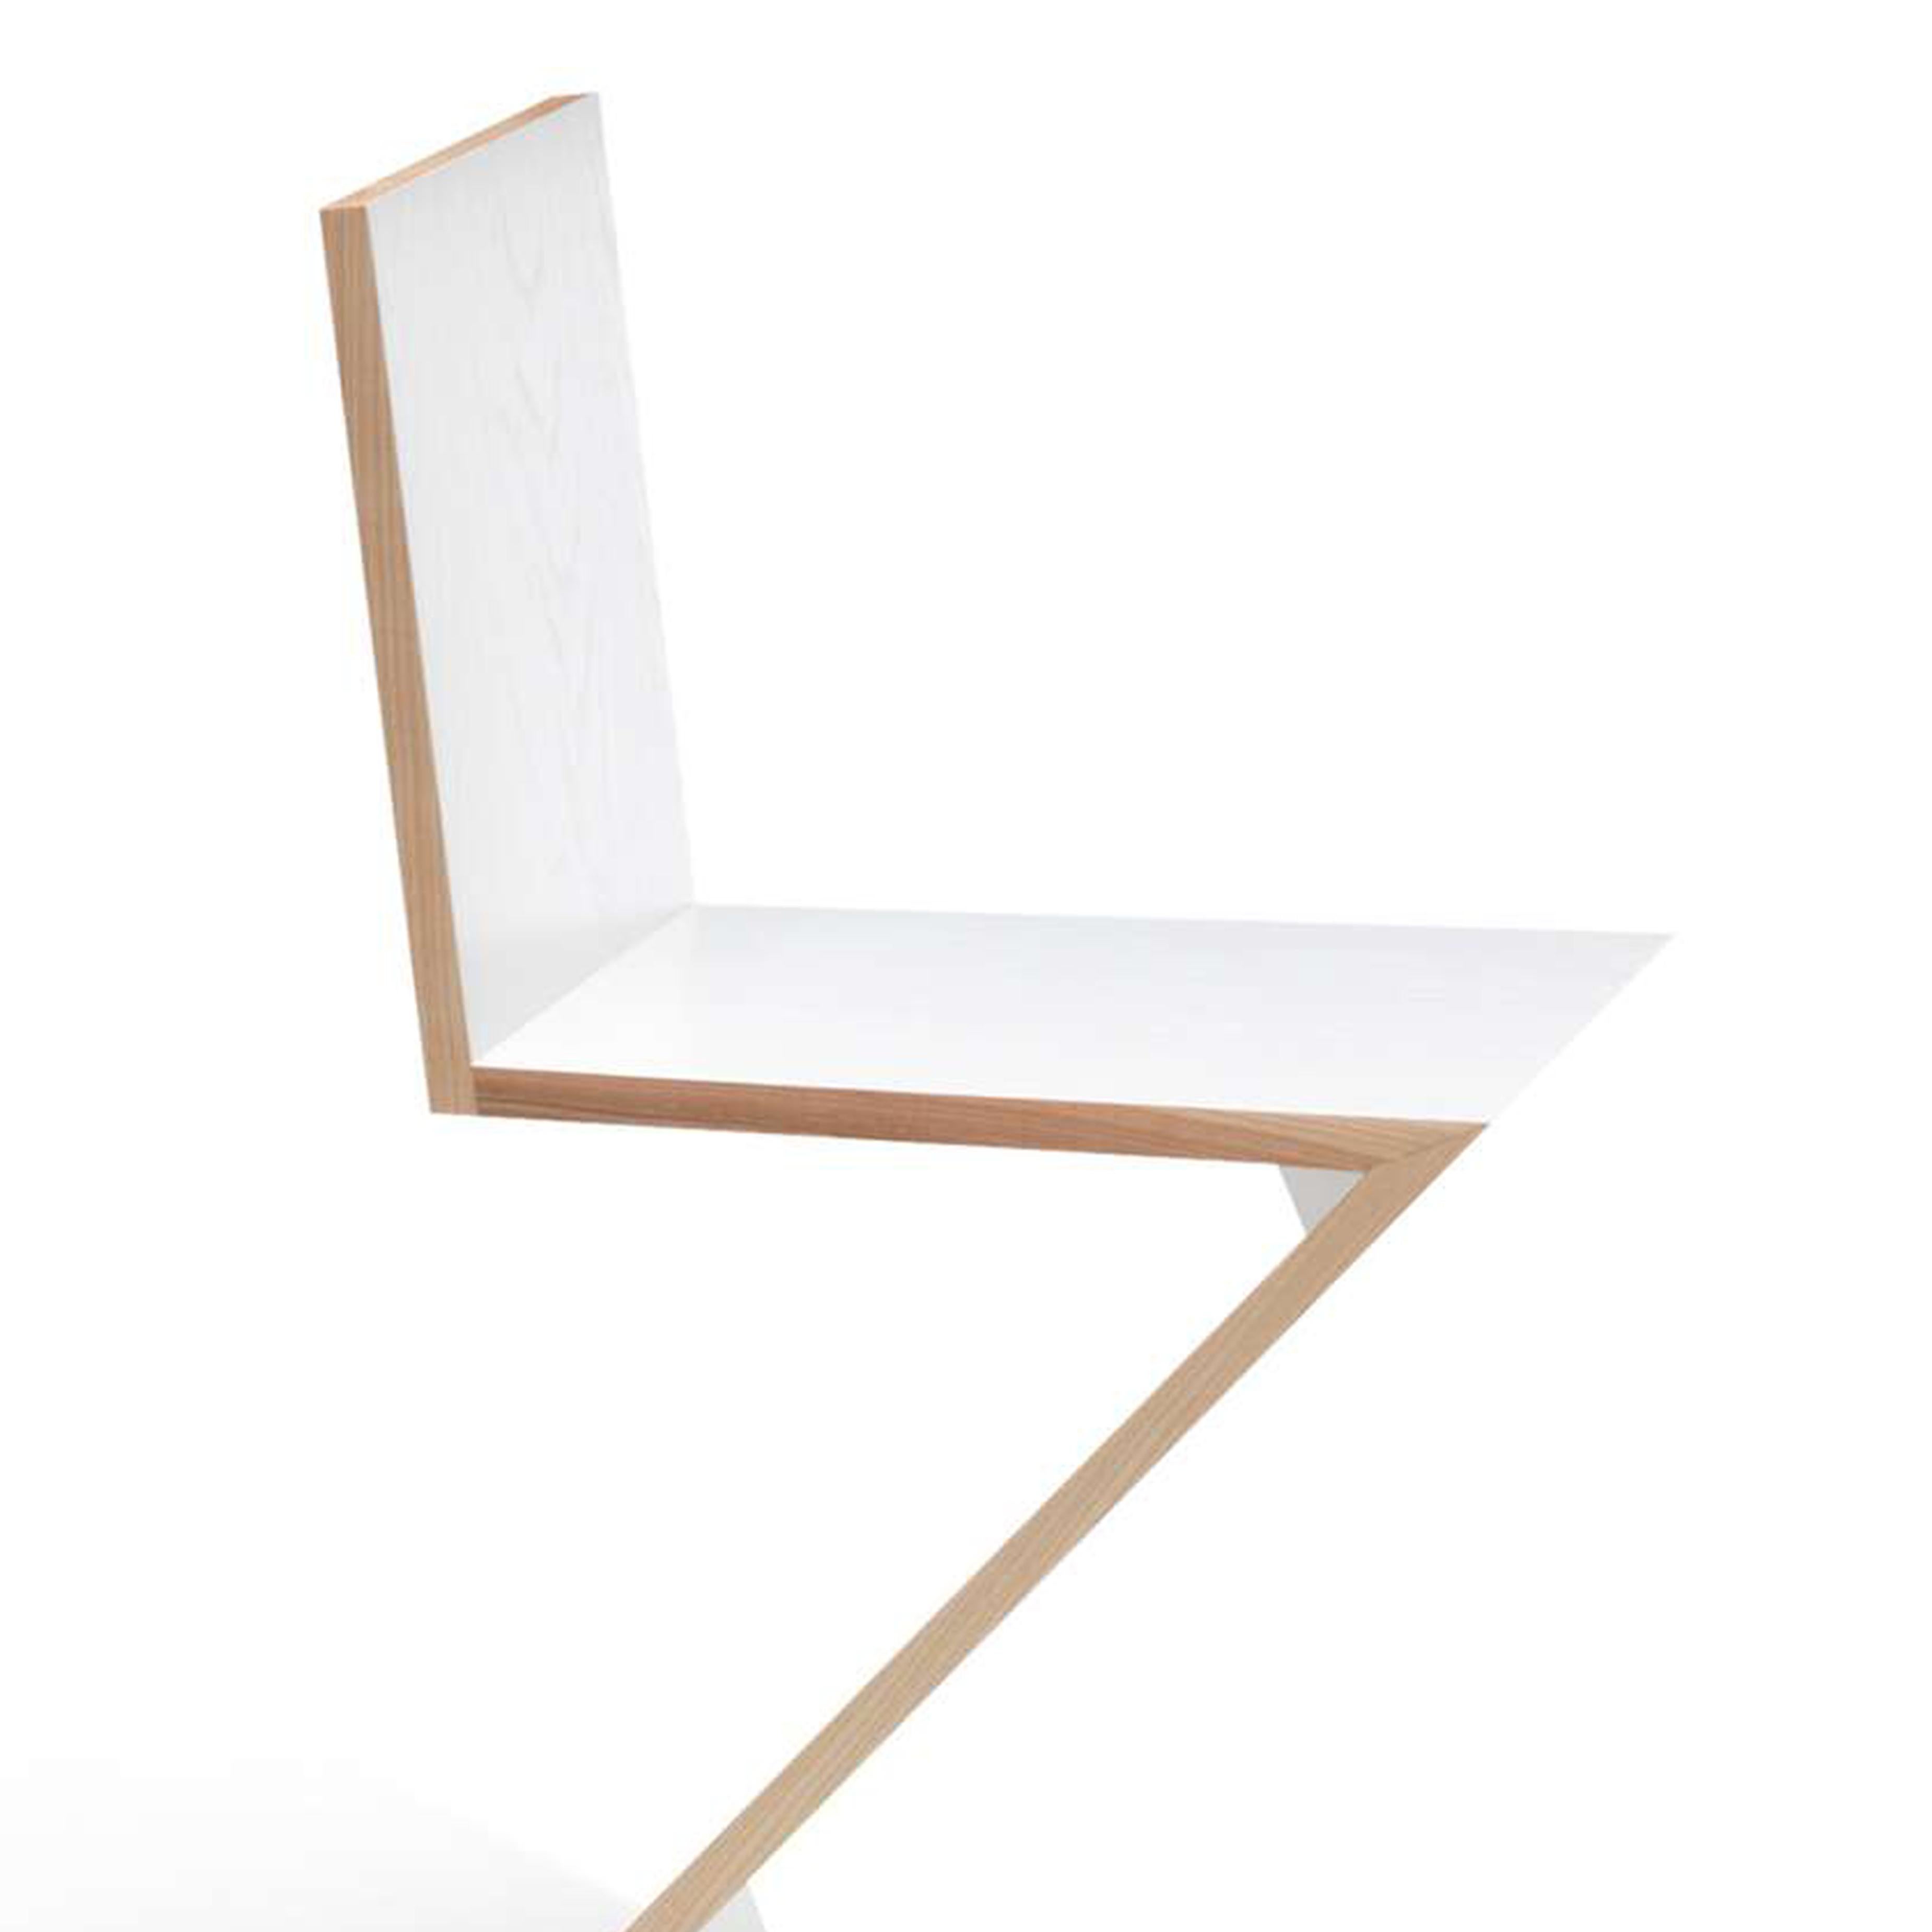 Chair designed by Gerrit Thomas Rietveld in 1934. Relaunched in 1973/ 2011.
Manufactured by Cassina in Italy.

Designed by Gerrit Rietveld, this chair provided an early example of a cantilevered seat, and is composed of four wood boards articulated